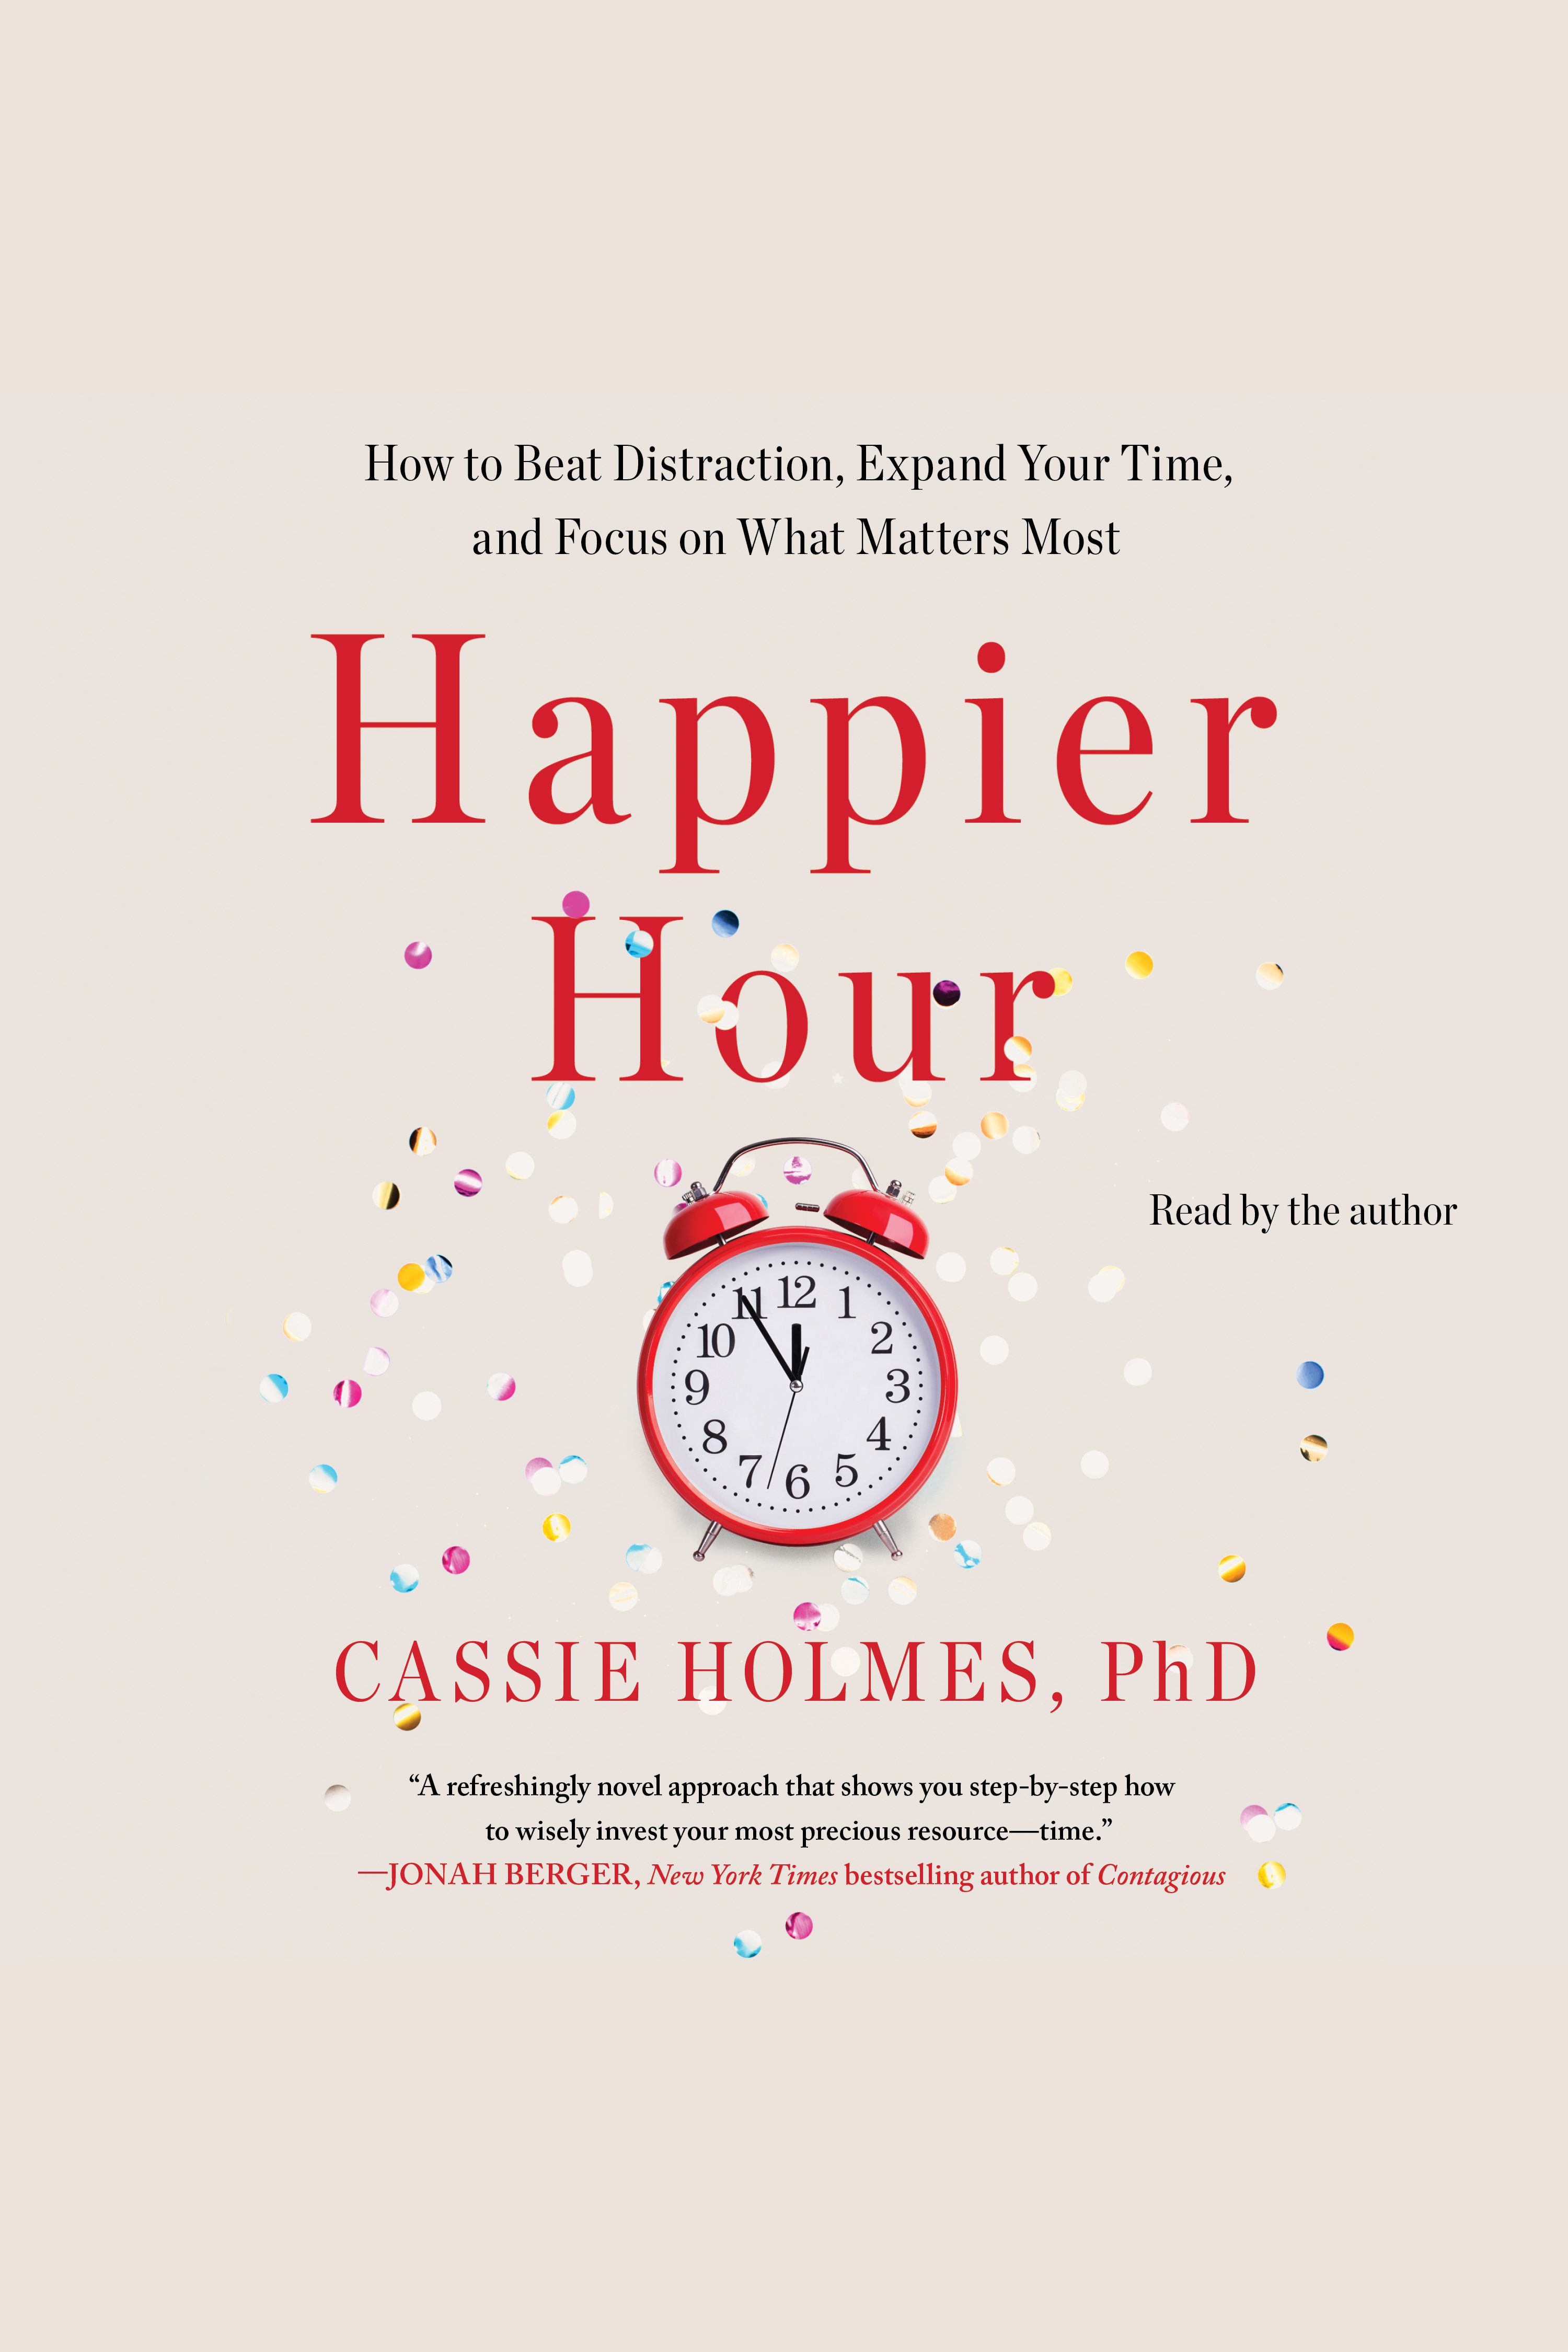 Happier Hour How to Beat Distraction, Expand Your Time, and Focus on What Matters Most cover image